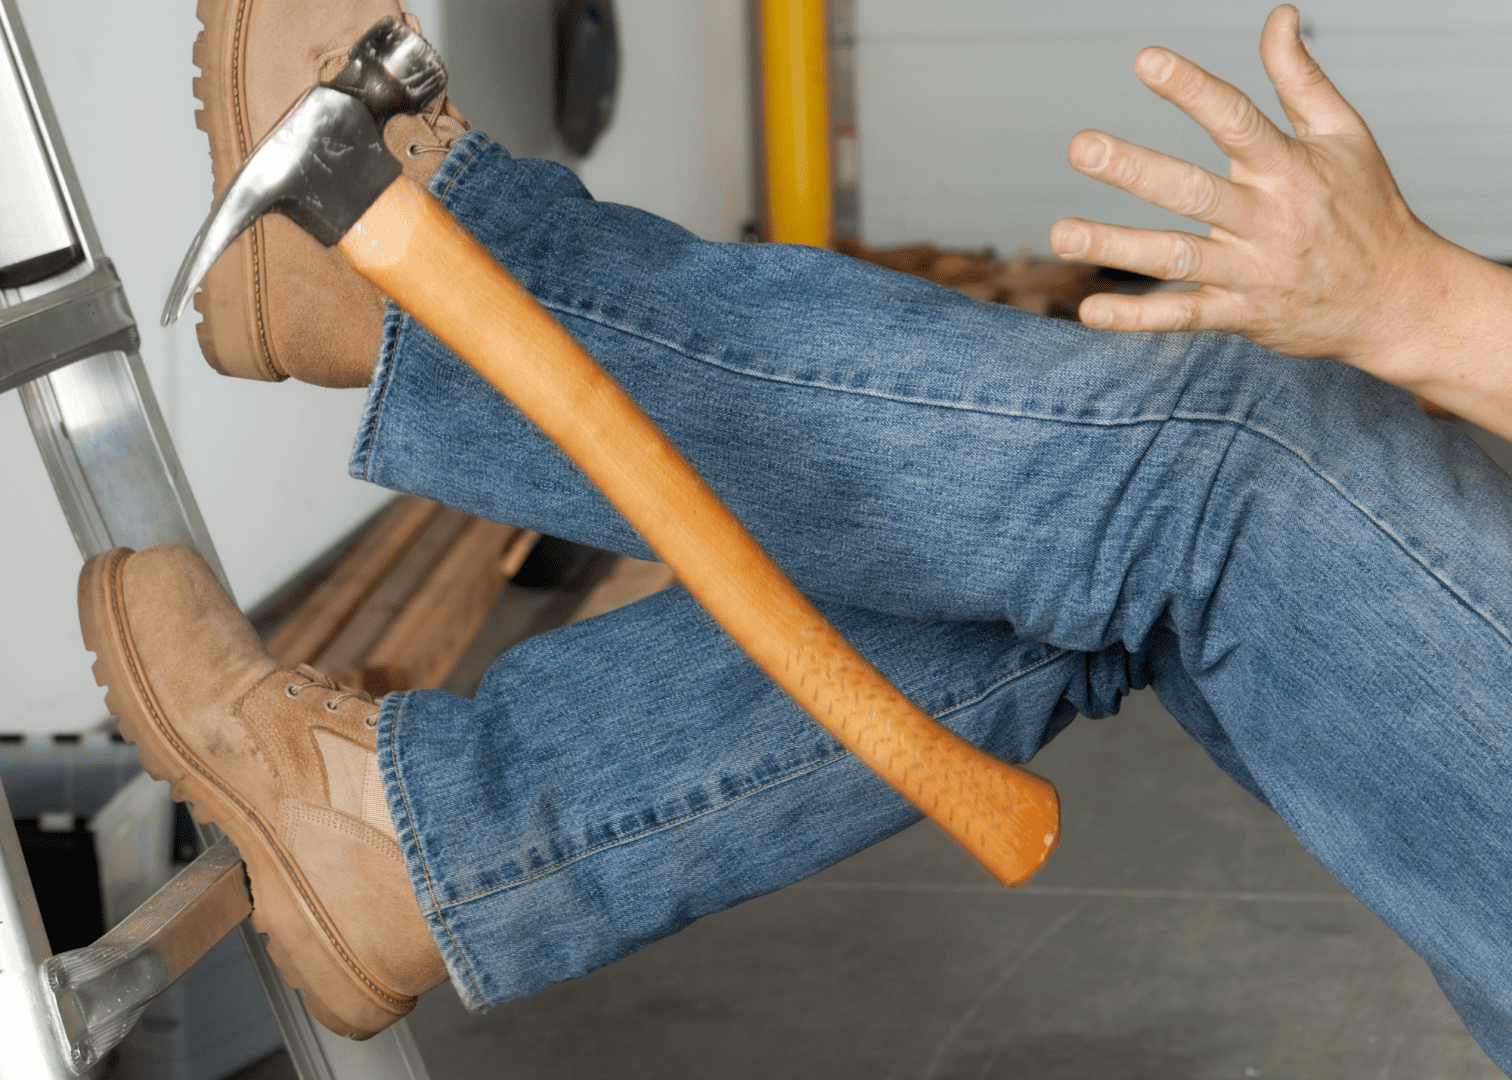 Job Site Fall - Work Injury Lawyer Fort Mill